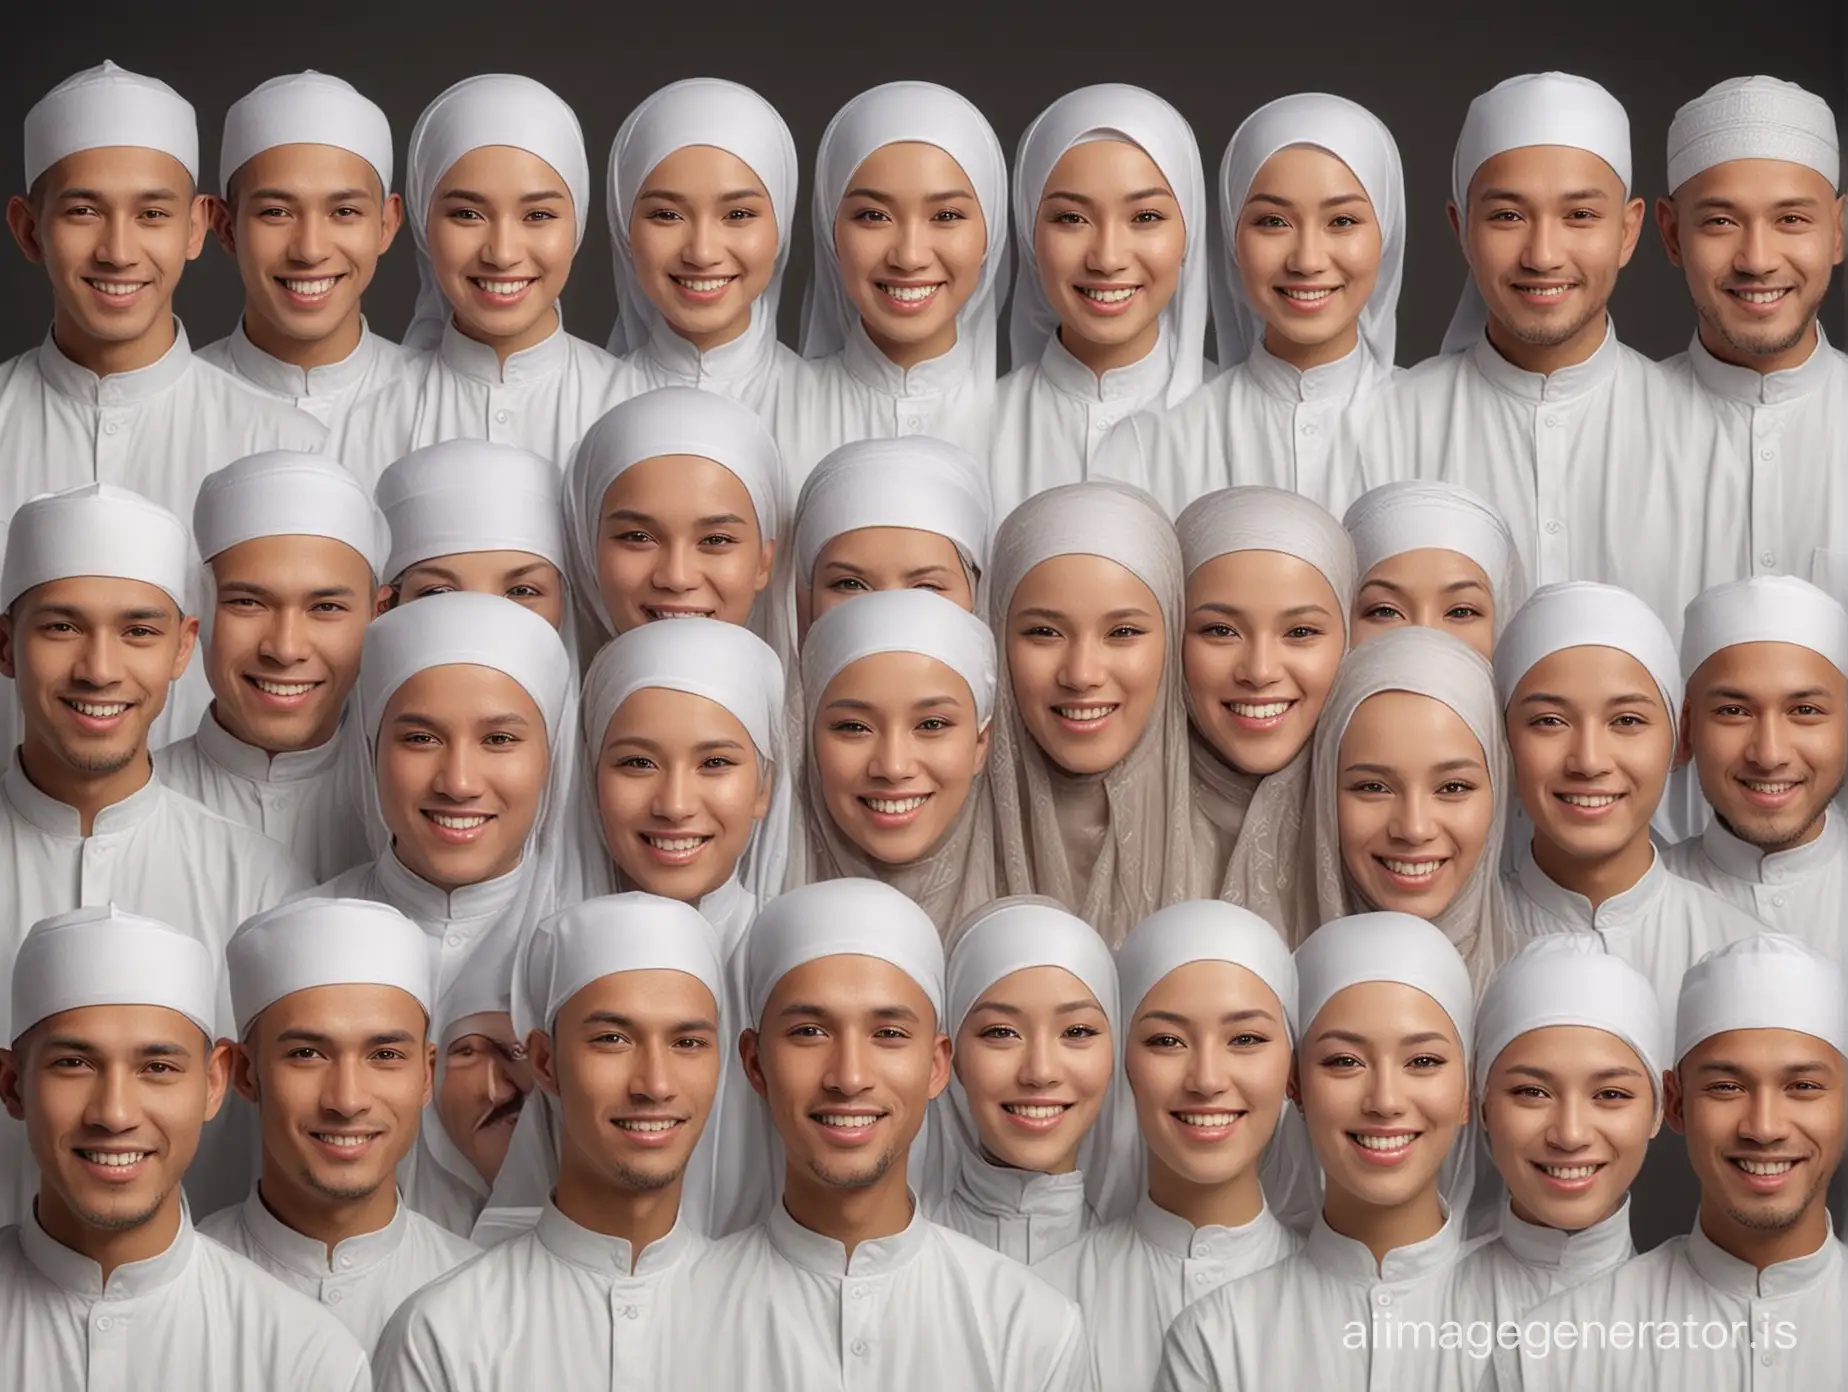 Create realistic photography. Humans numbered dozens of adults, adult men and women. Clean face without hair. Everyone is normal and happy together. Dressed in white (Asian Muslims). Dark colored photo studio background.